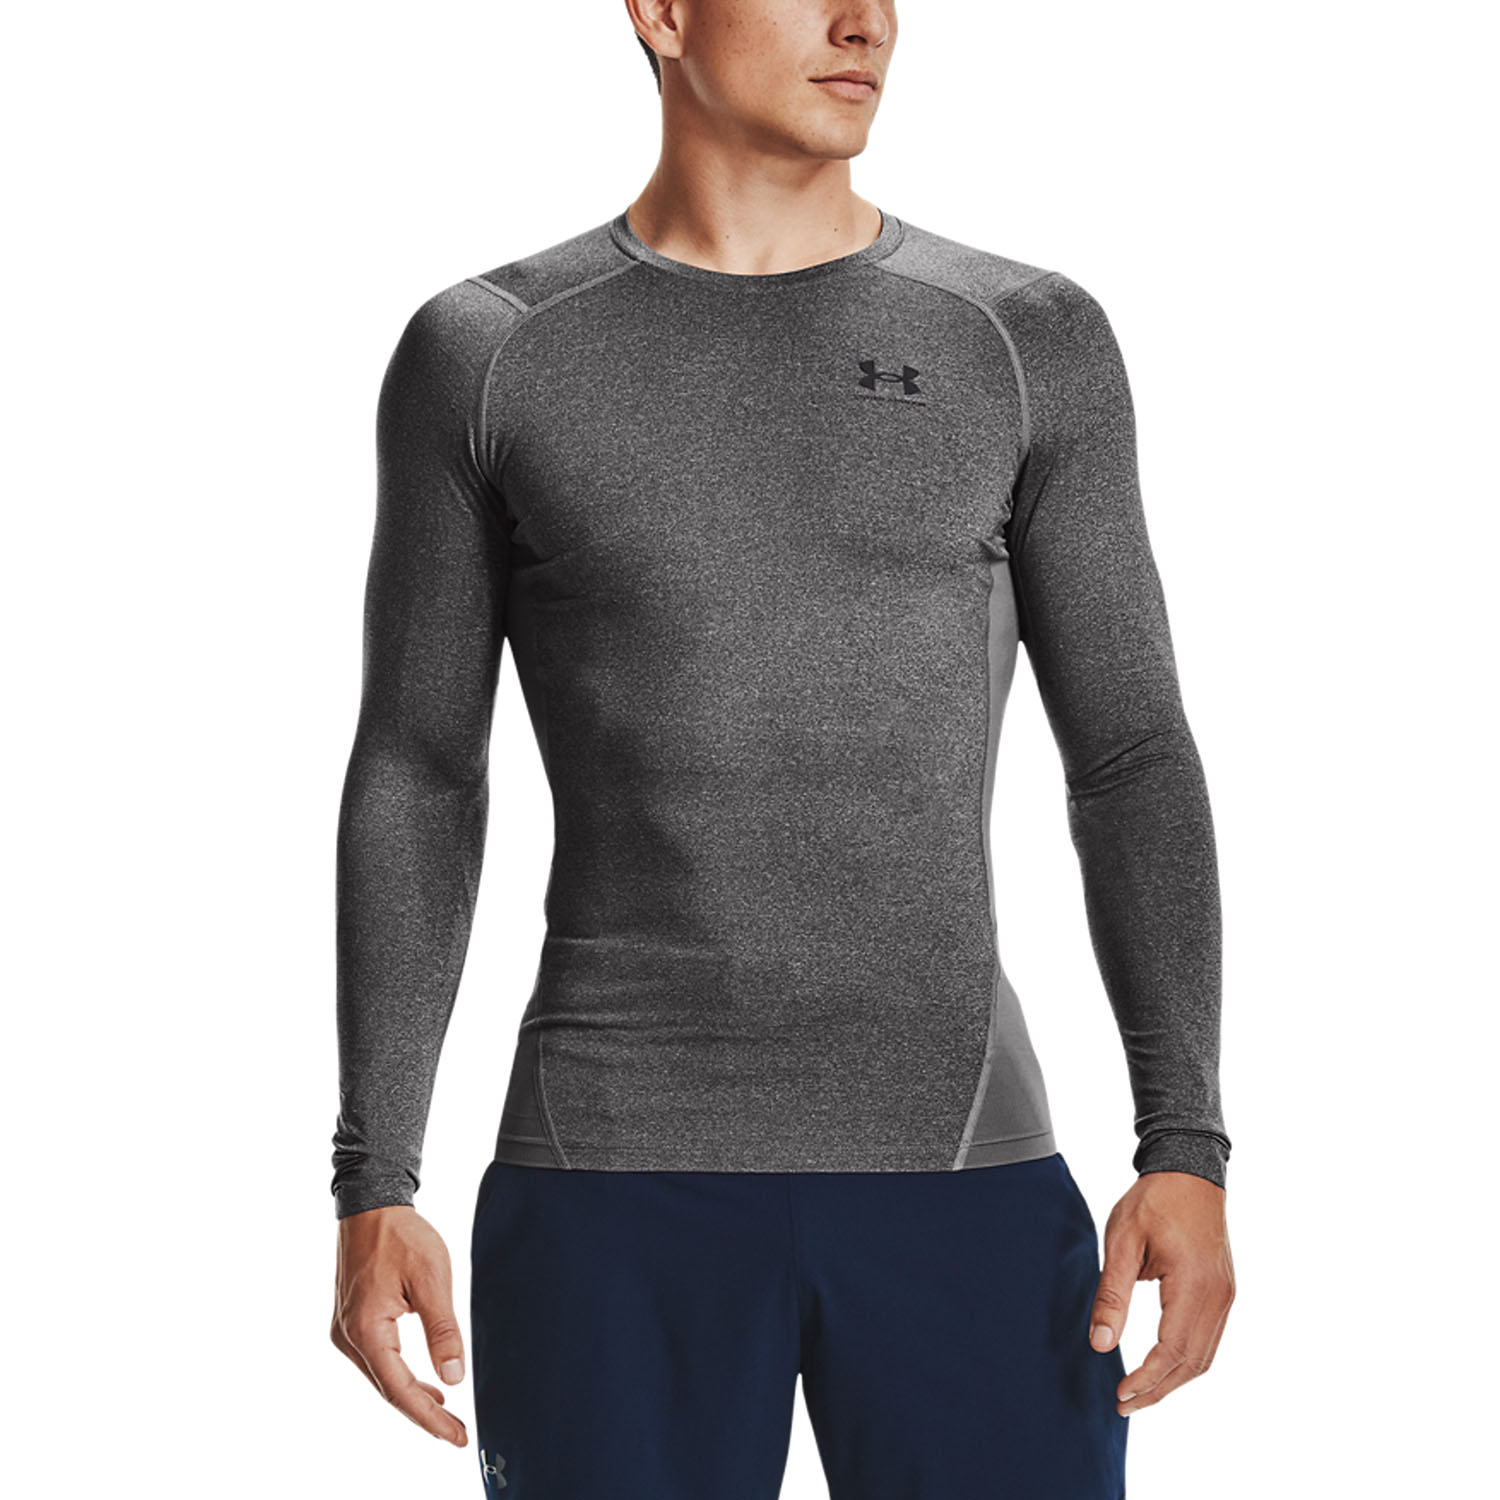 Under Armor T-shirt M 1361506-100 – Your Sports Performance